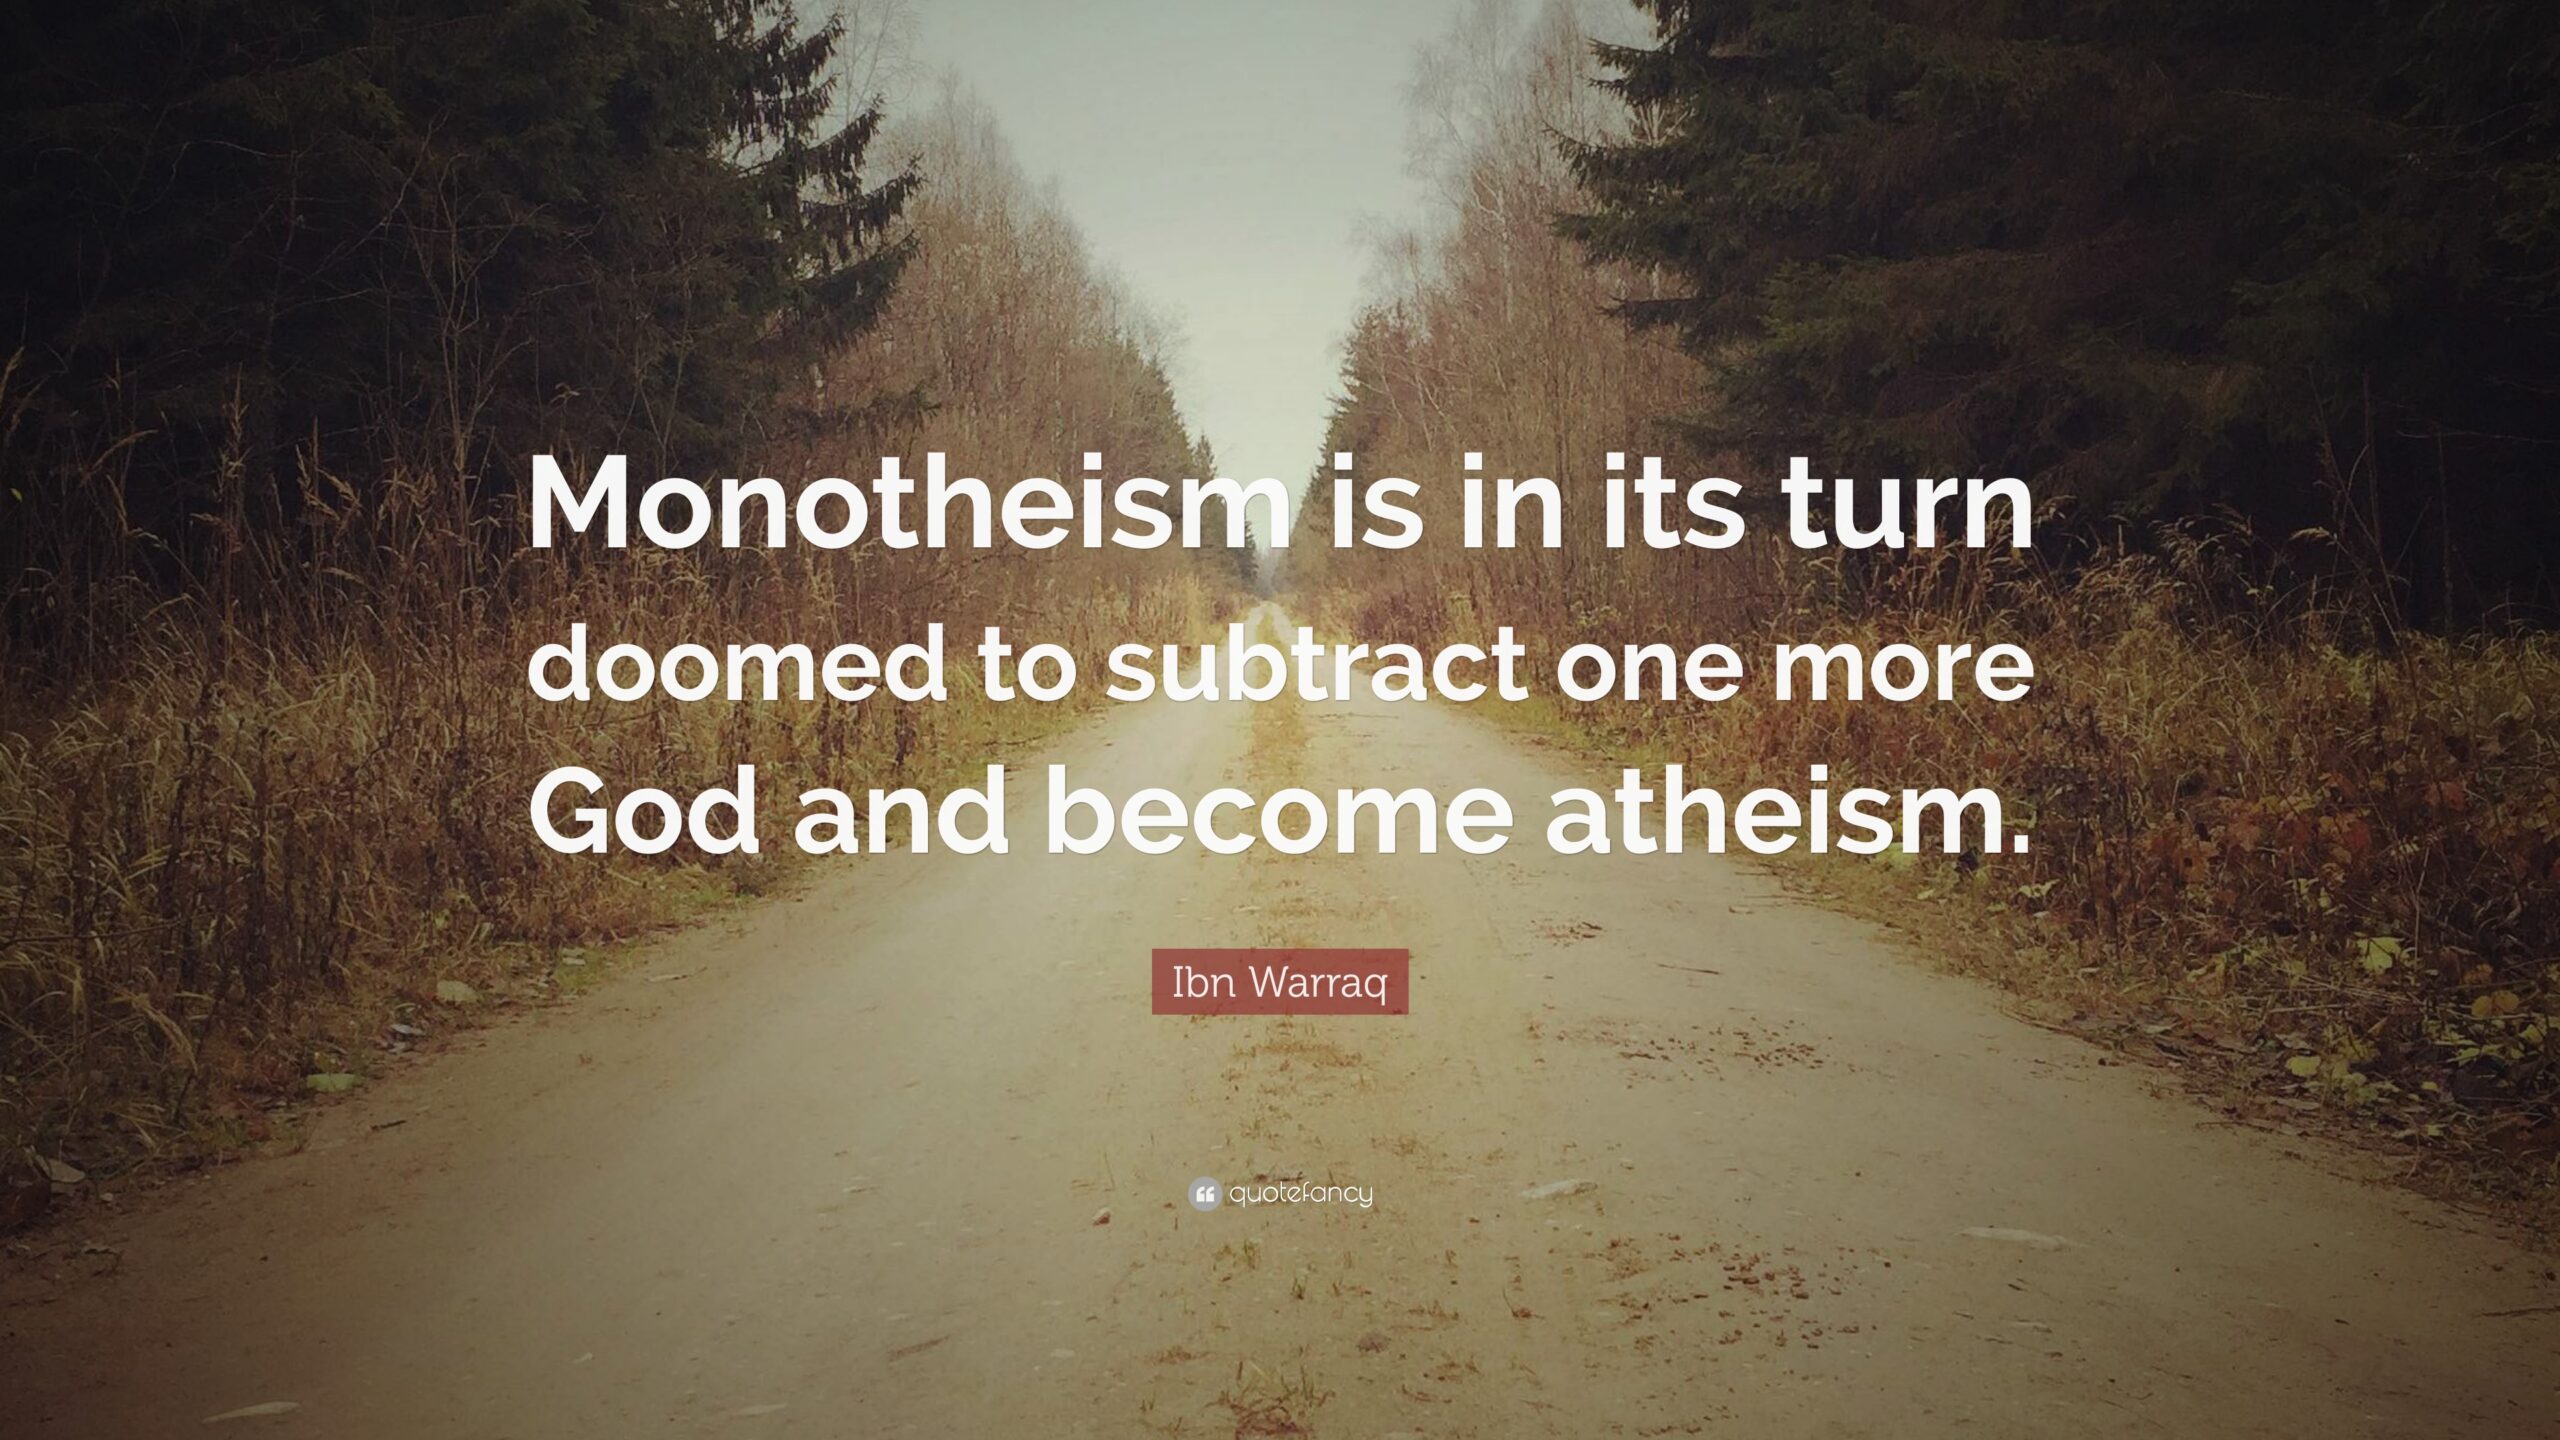 Ibn Warraq Quote “Monotheism is in its turn doomed to subtract one